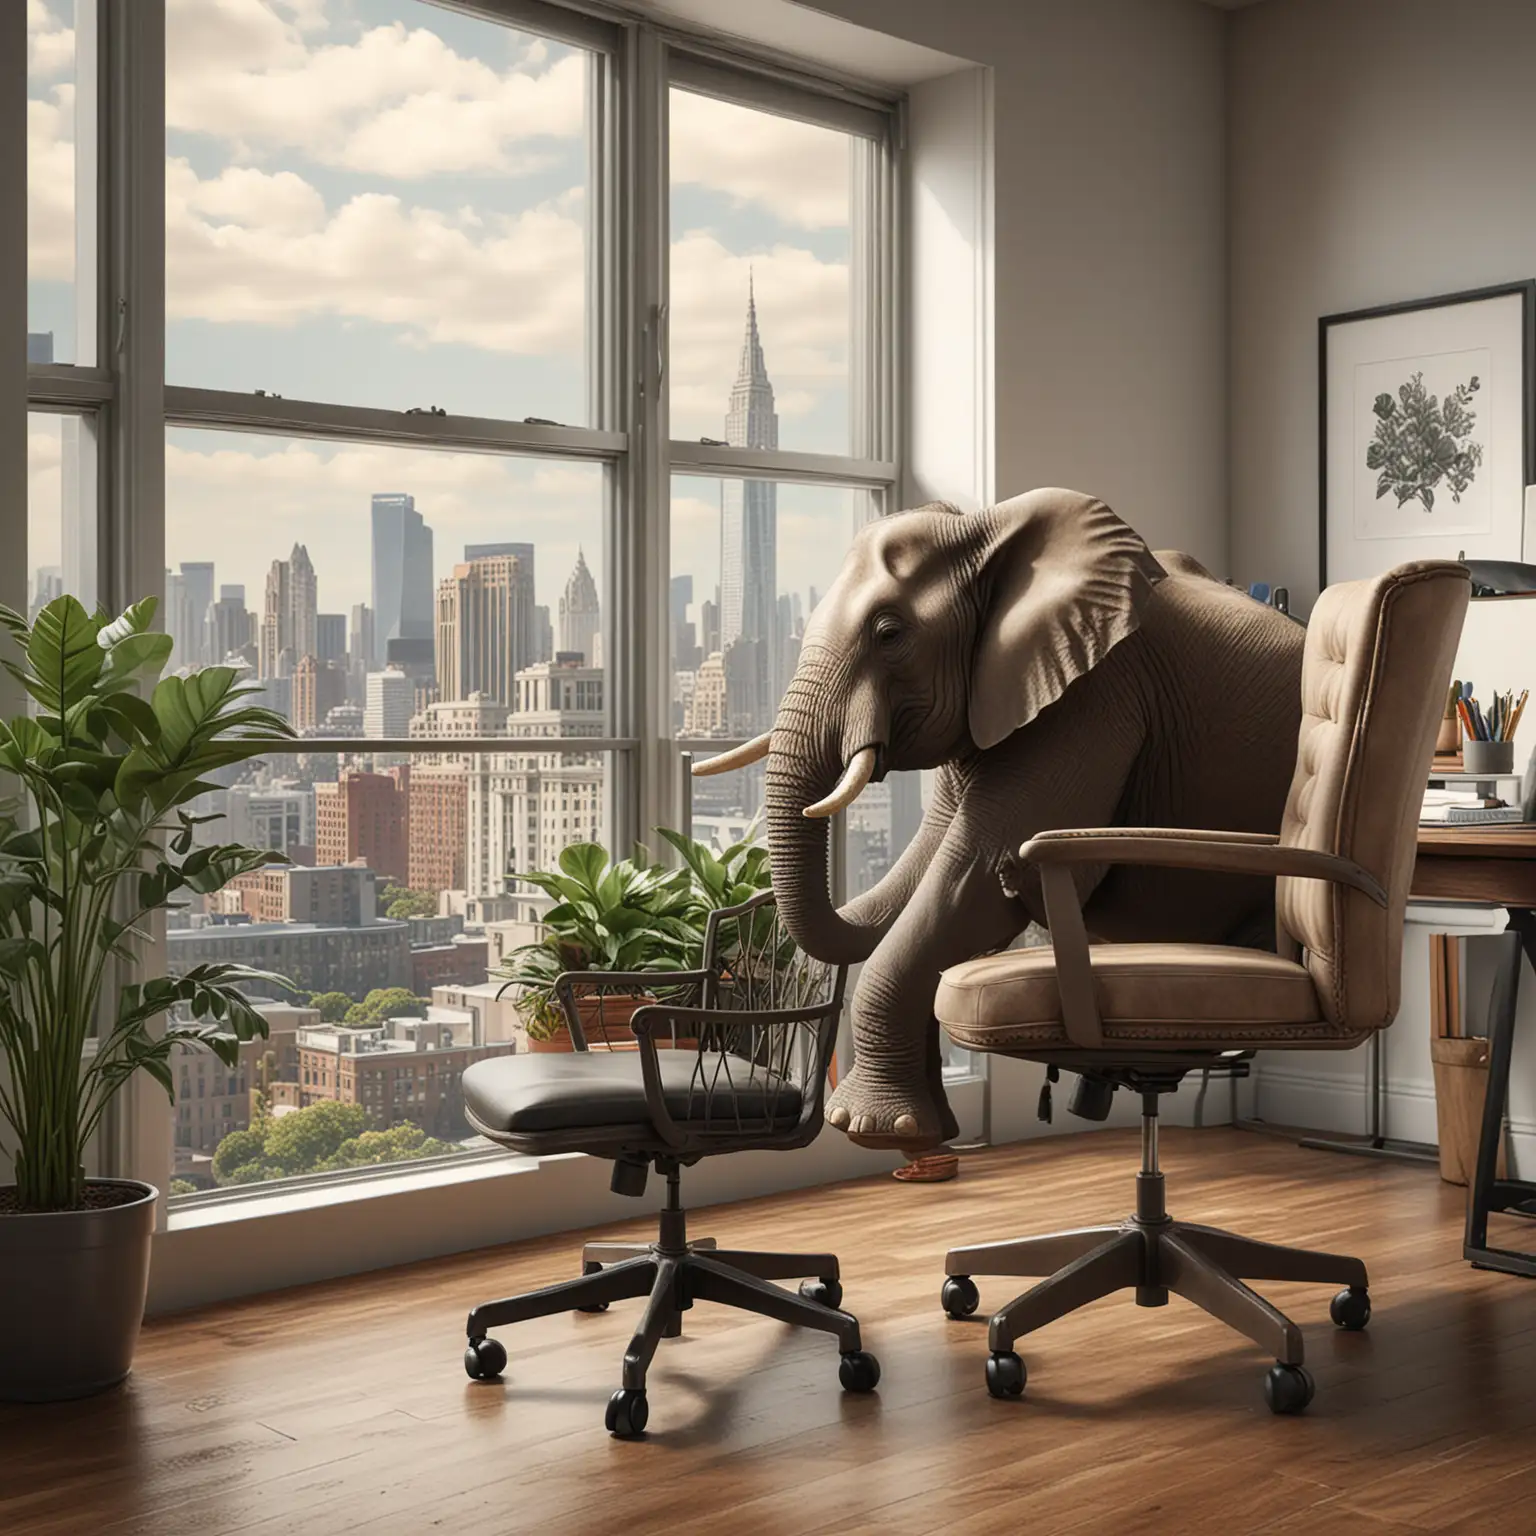 Generate a realistic image of an elephant seated in an office chair  behind an ornate desk in an office environment. The elephant should appear engaged with a laptop computer placed on the desk, as if it's deeply focused on its work. 

The office space includes large windows that provide a view of the city skyline outside. plants and natural elements around the office space. eye level perspective. create detailed elements that add interest. rich and robust color. 